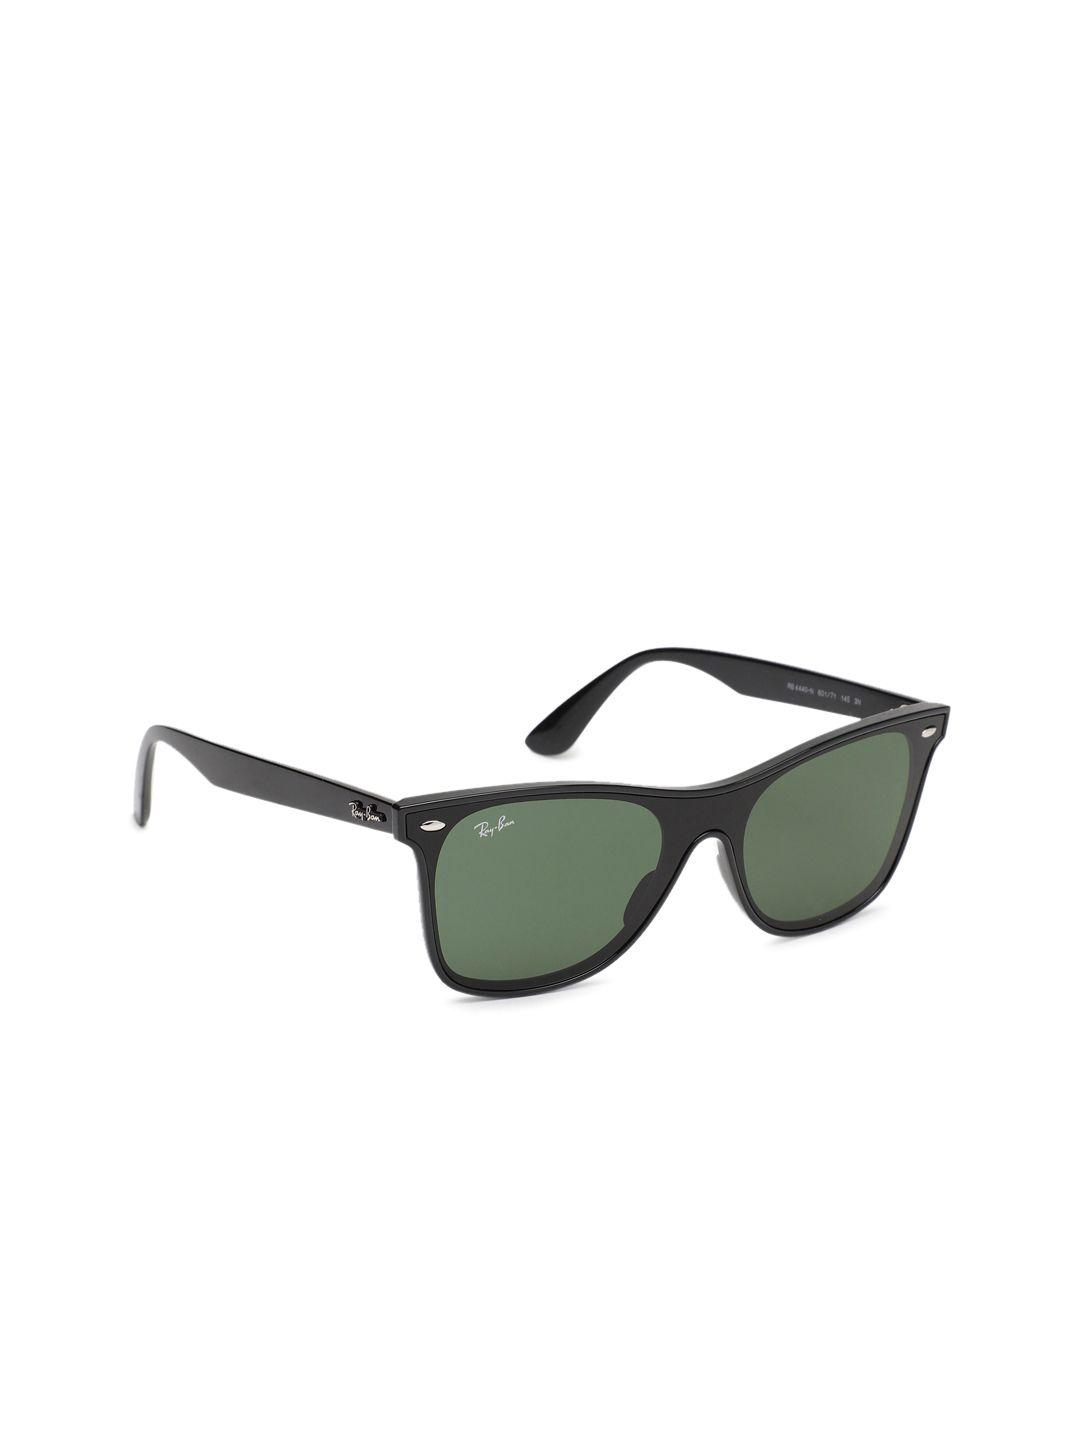 ray-ban unisex round sunglasses 0rb4440n601/7141